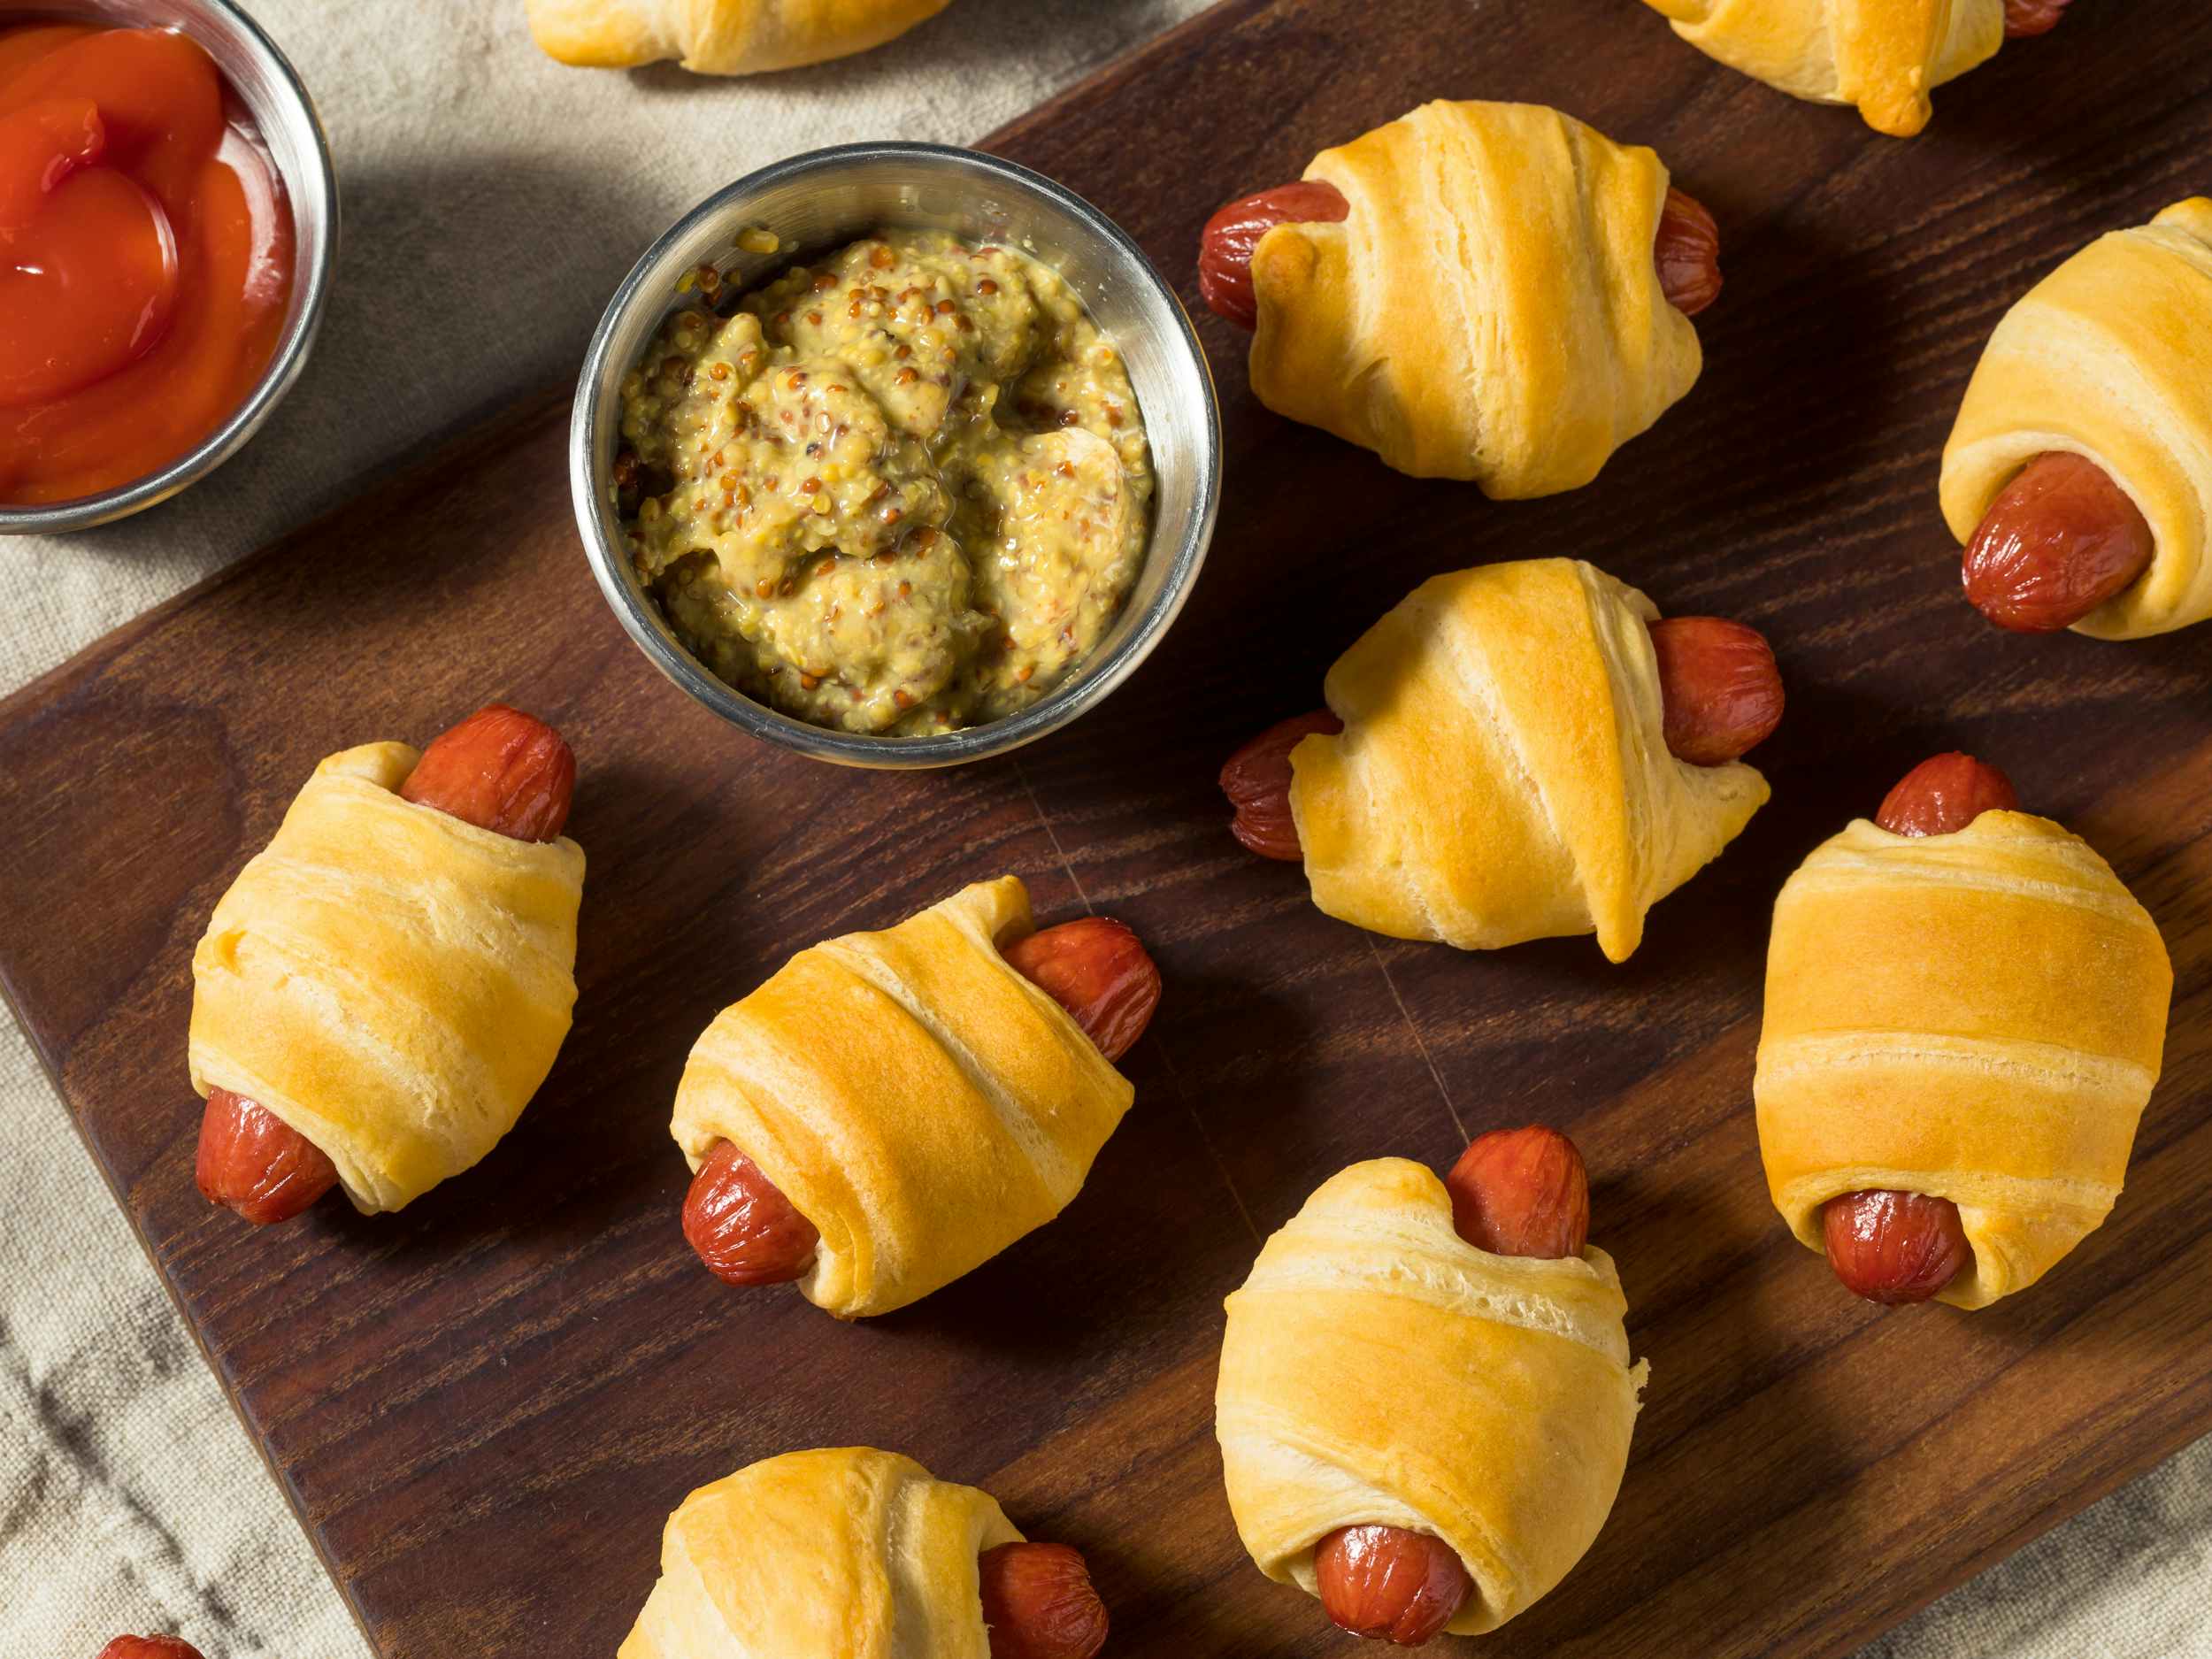 pigs in a blanket recipe with stone ground mustard for dipping